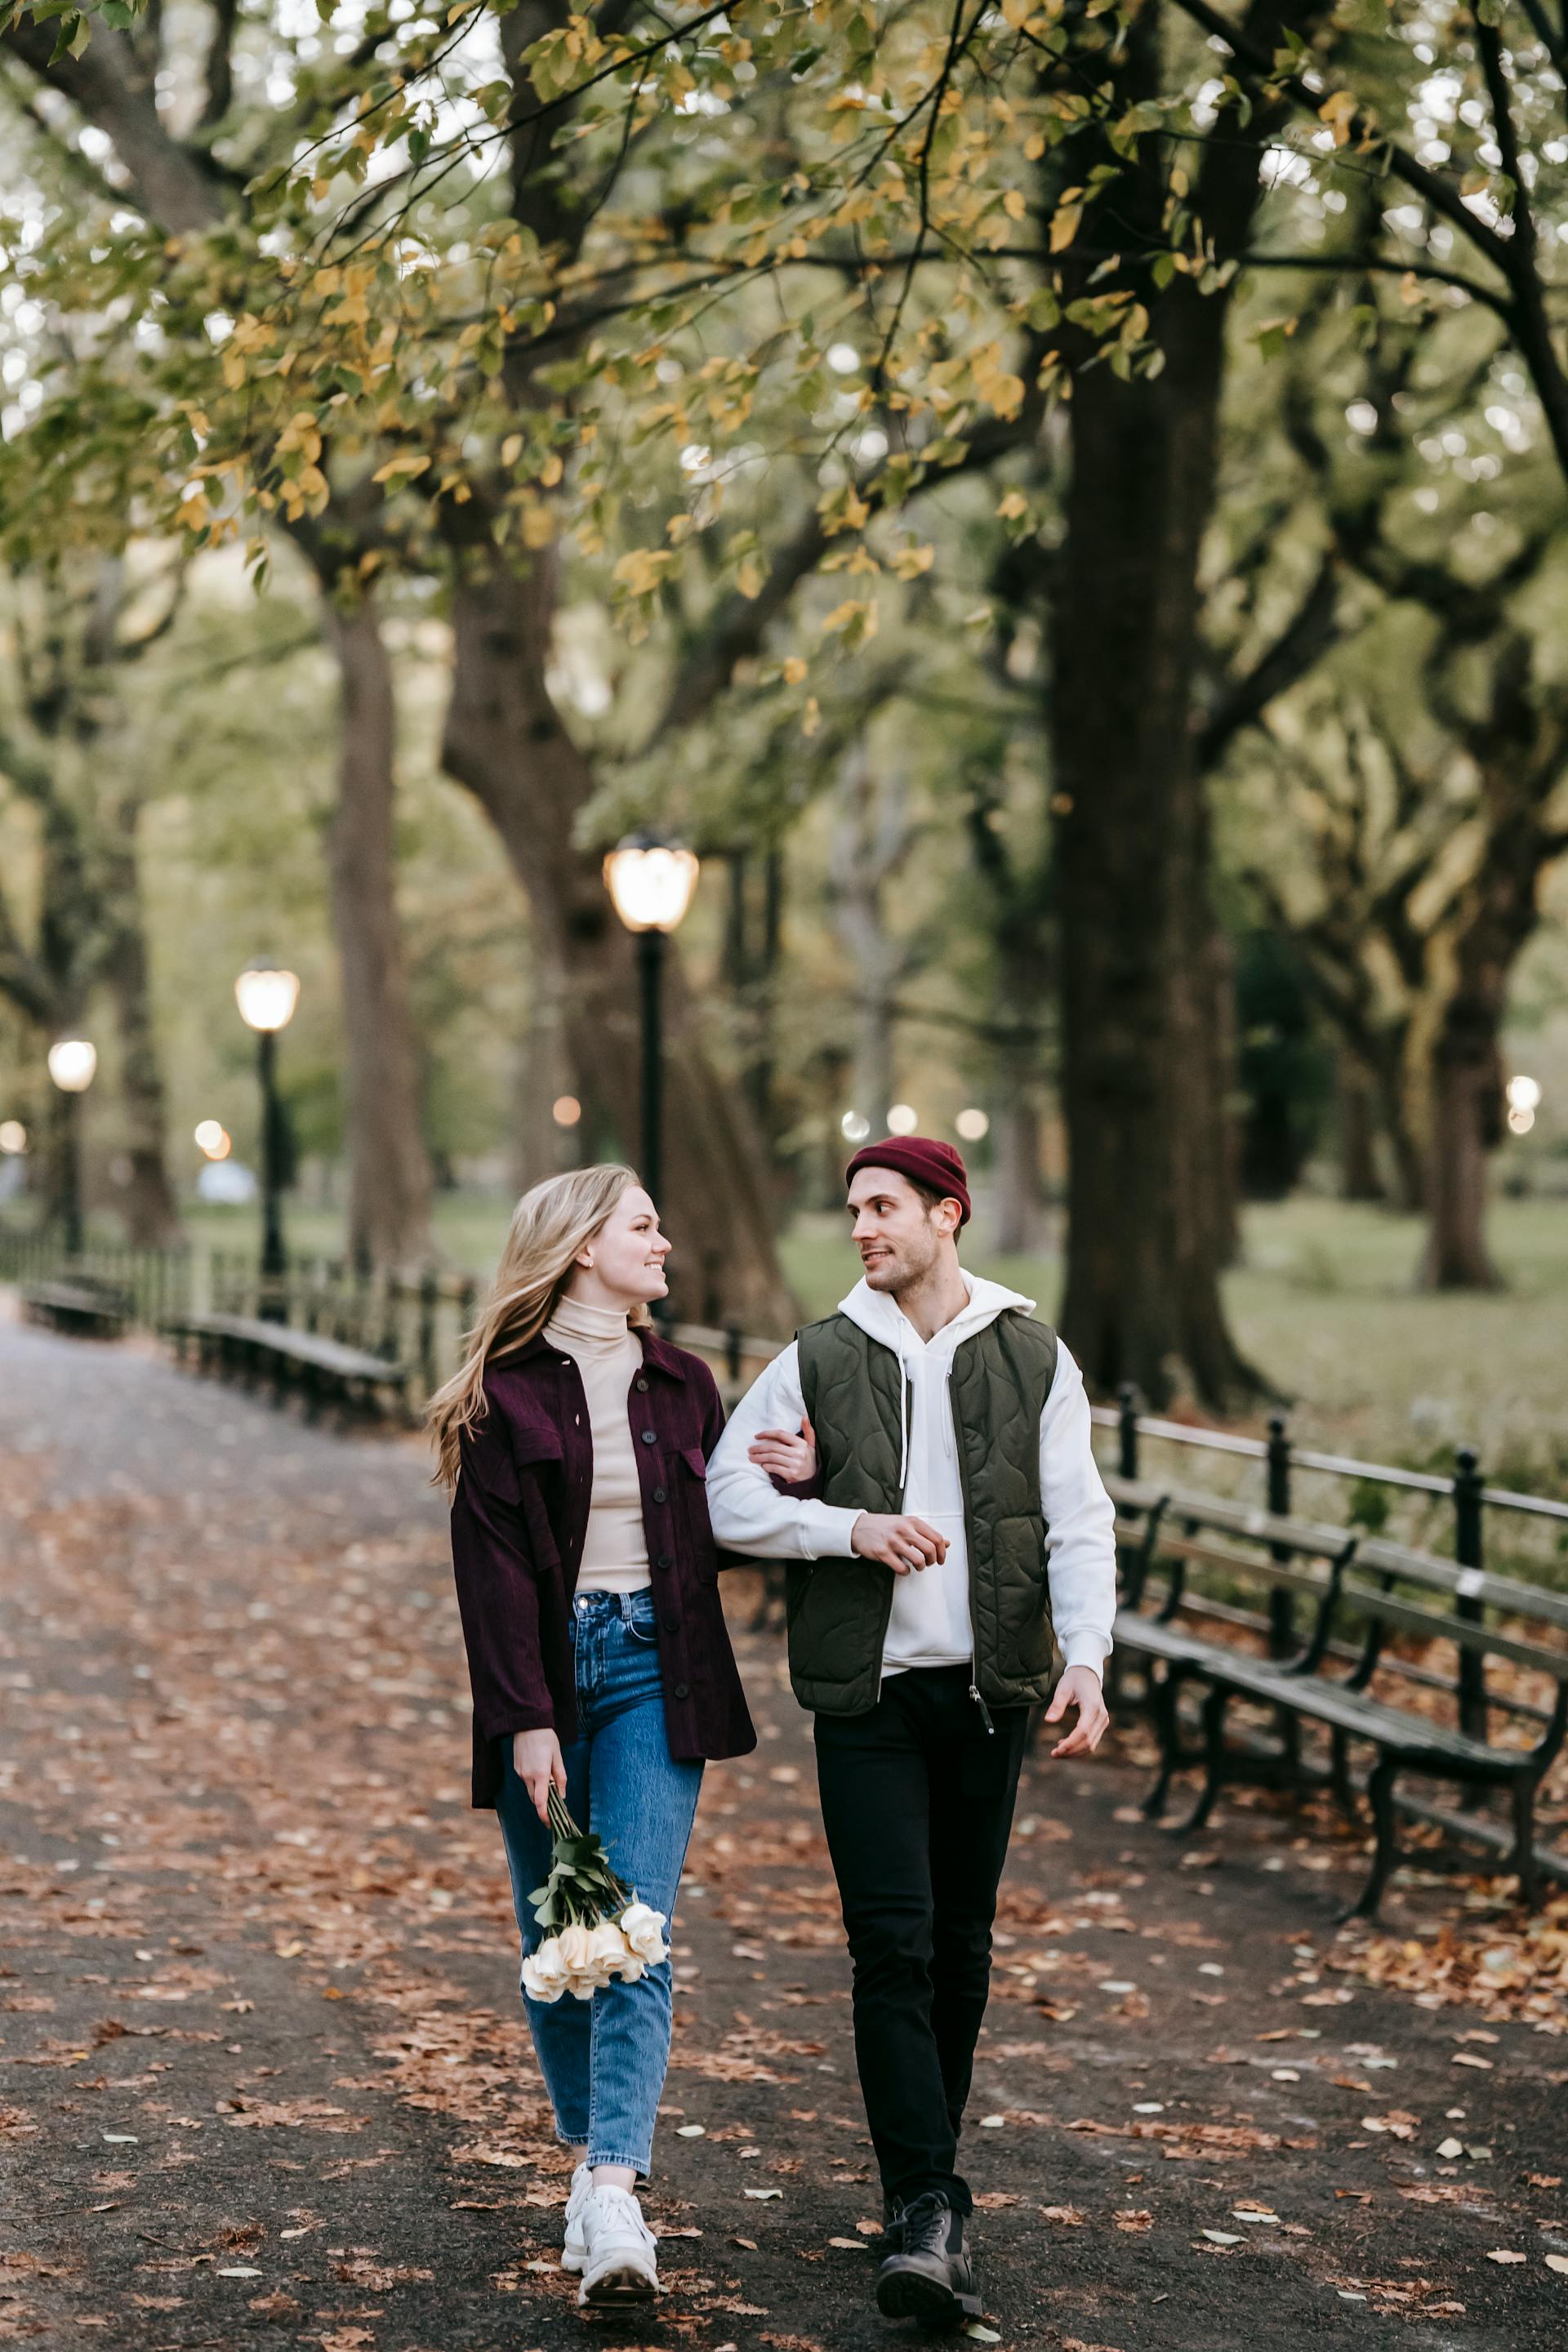 A couple strolling in a park | Source: Pexels